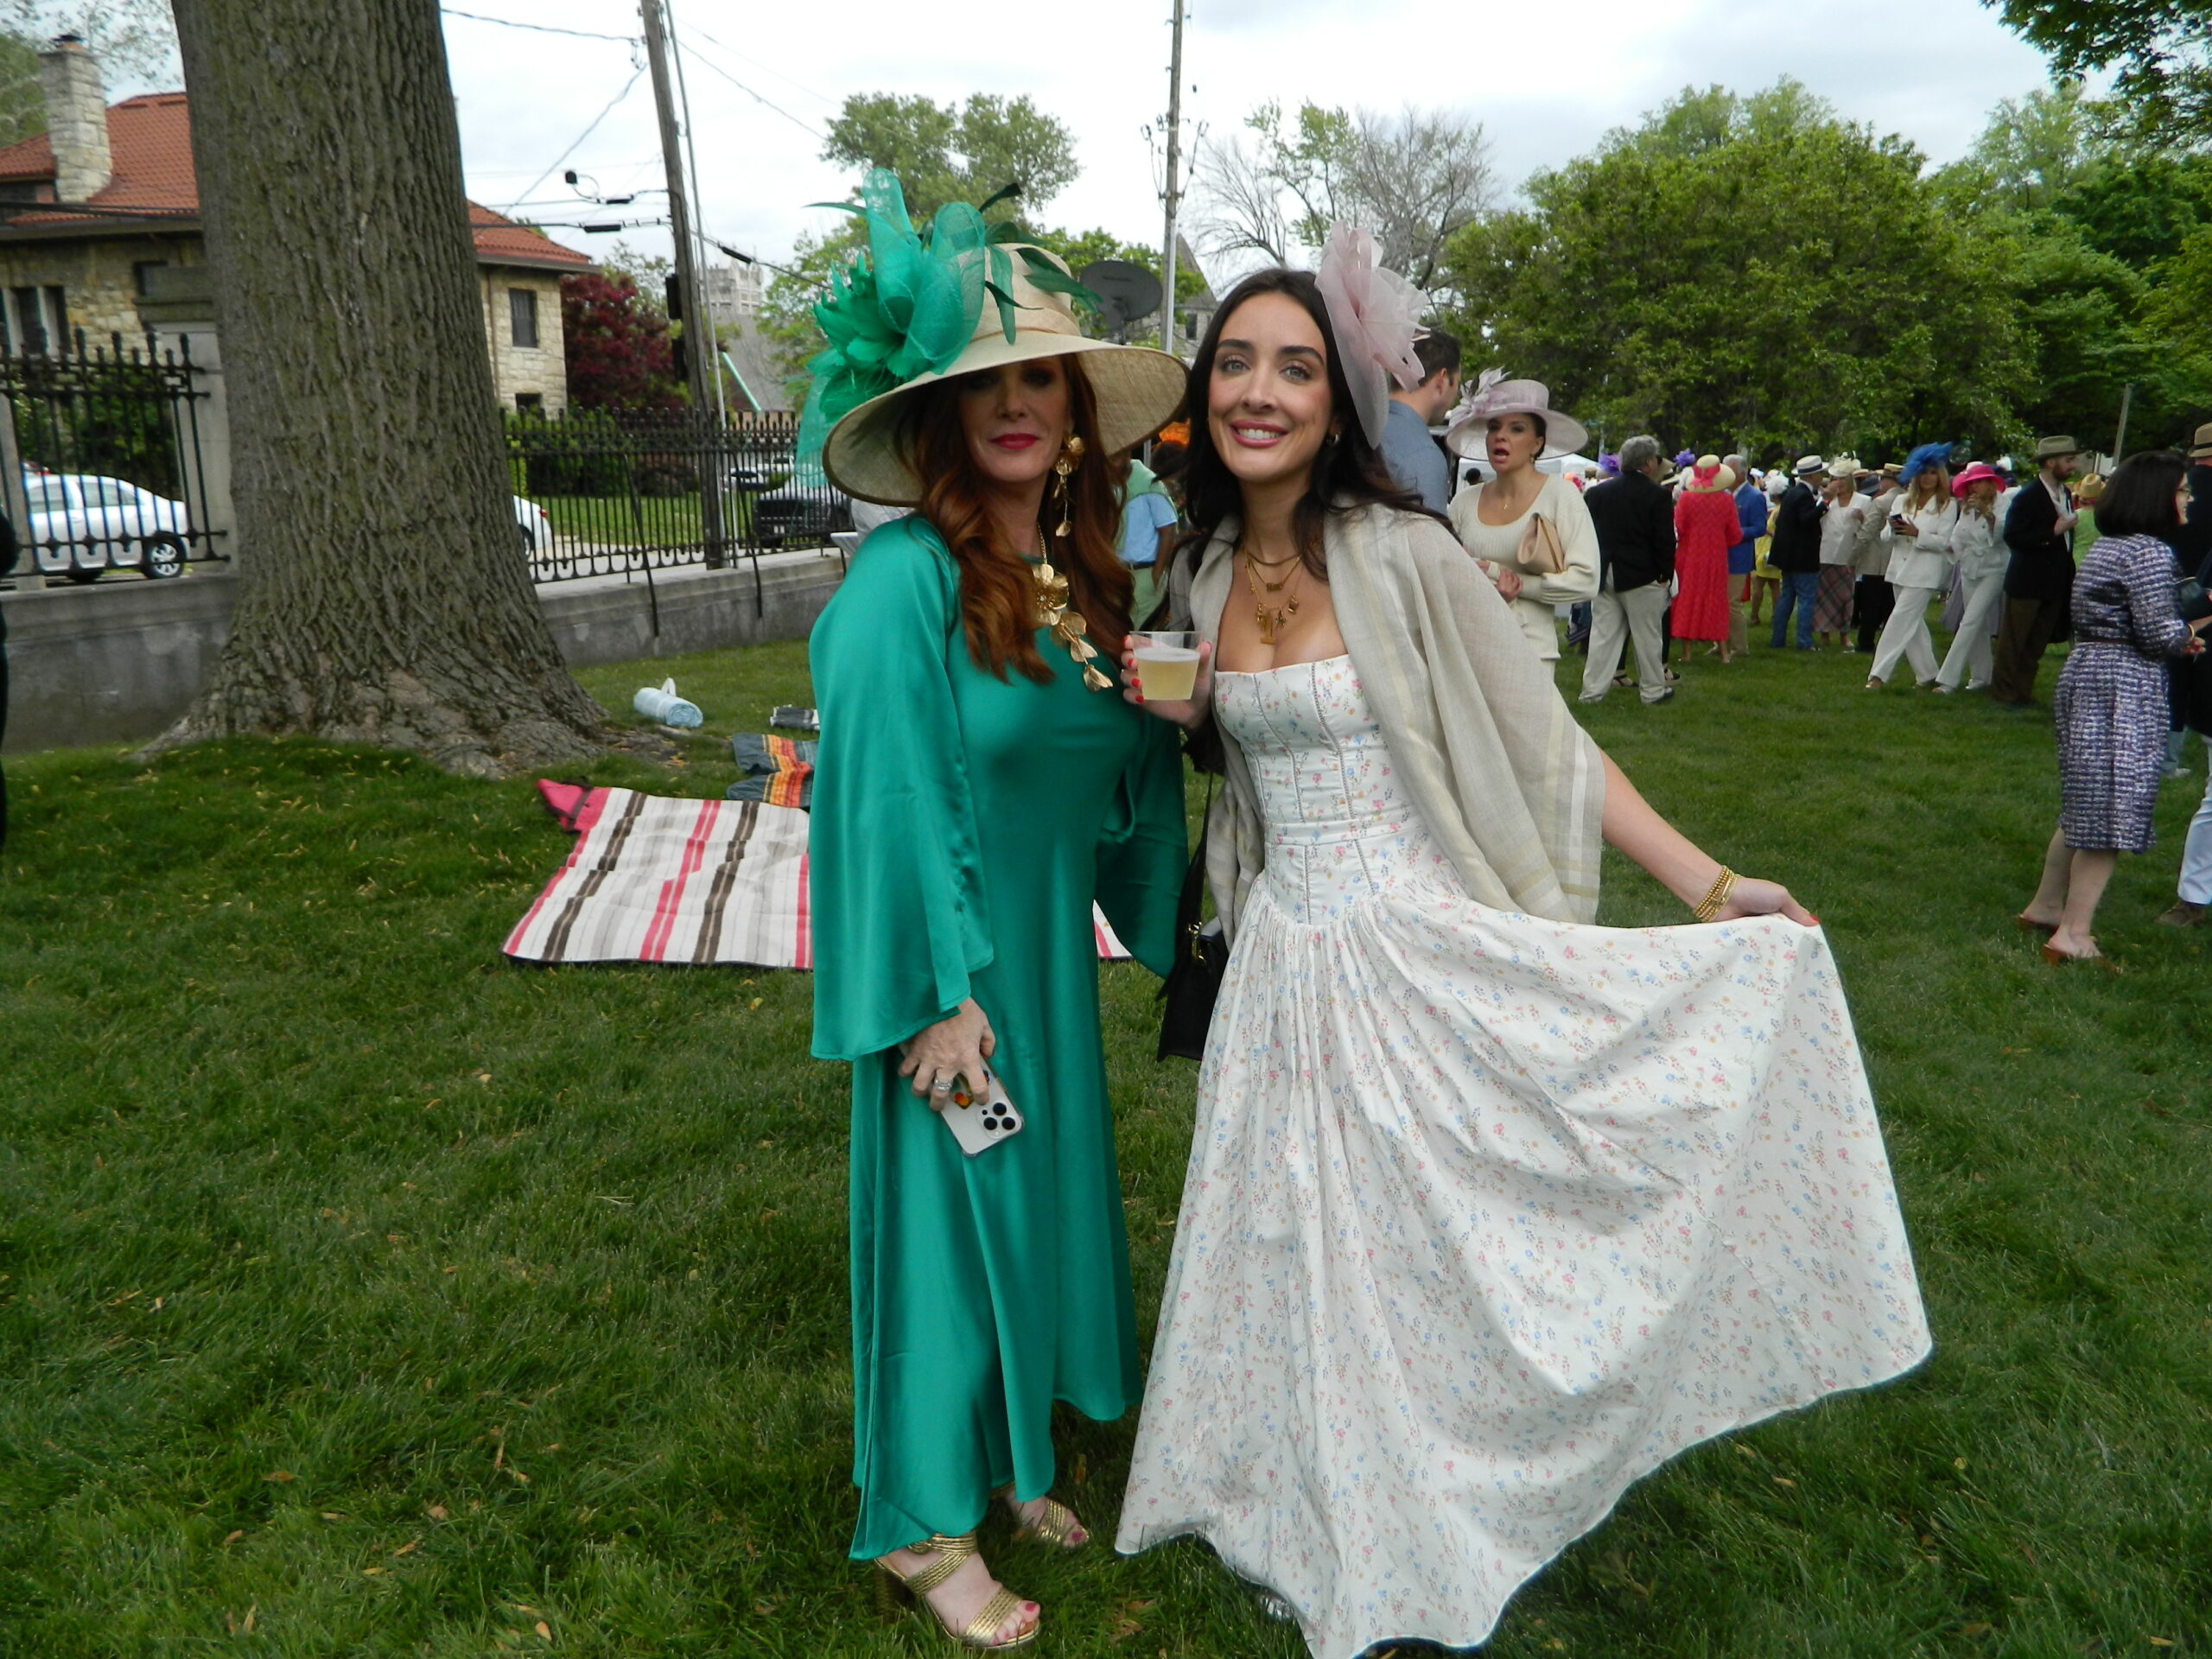 Kansas City Museum Derby Day, A Most Successful Affair